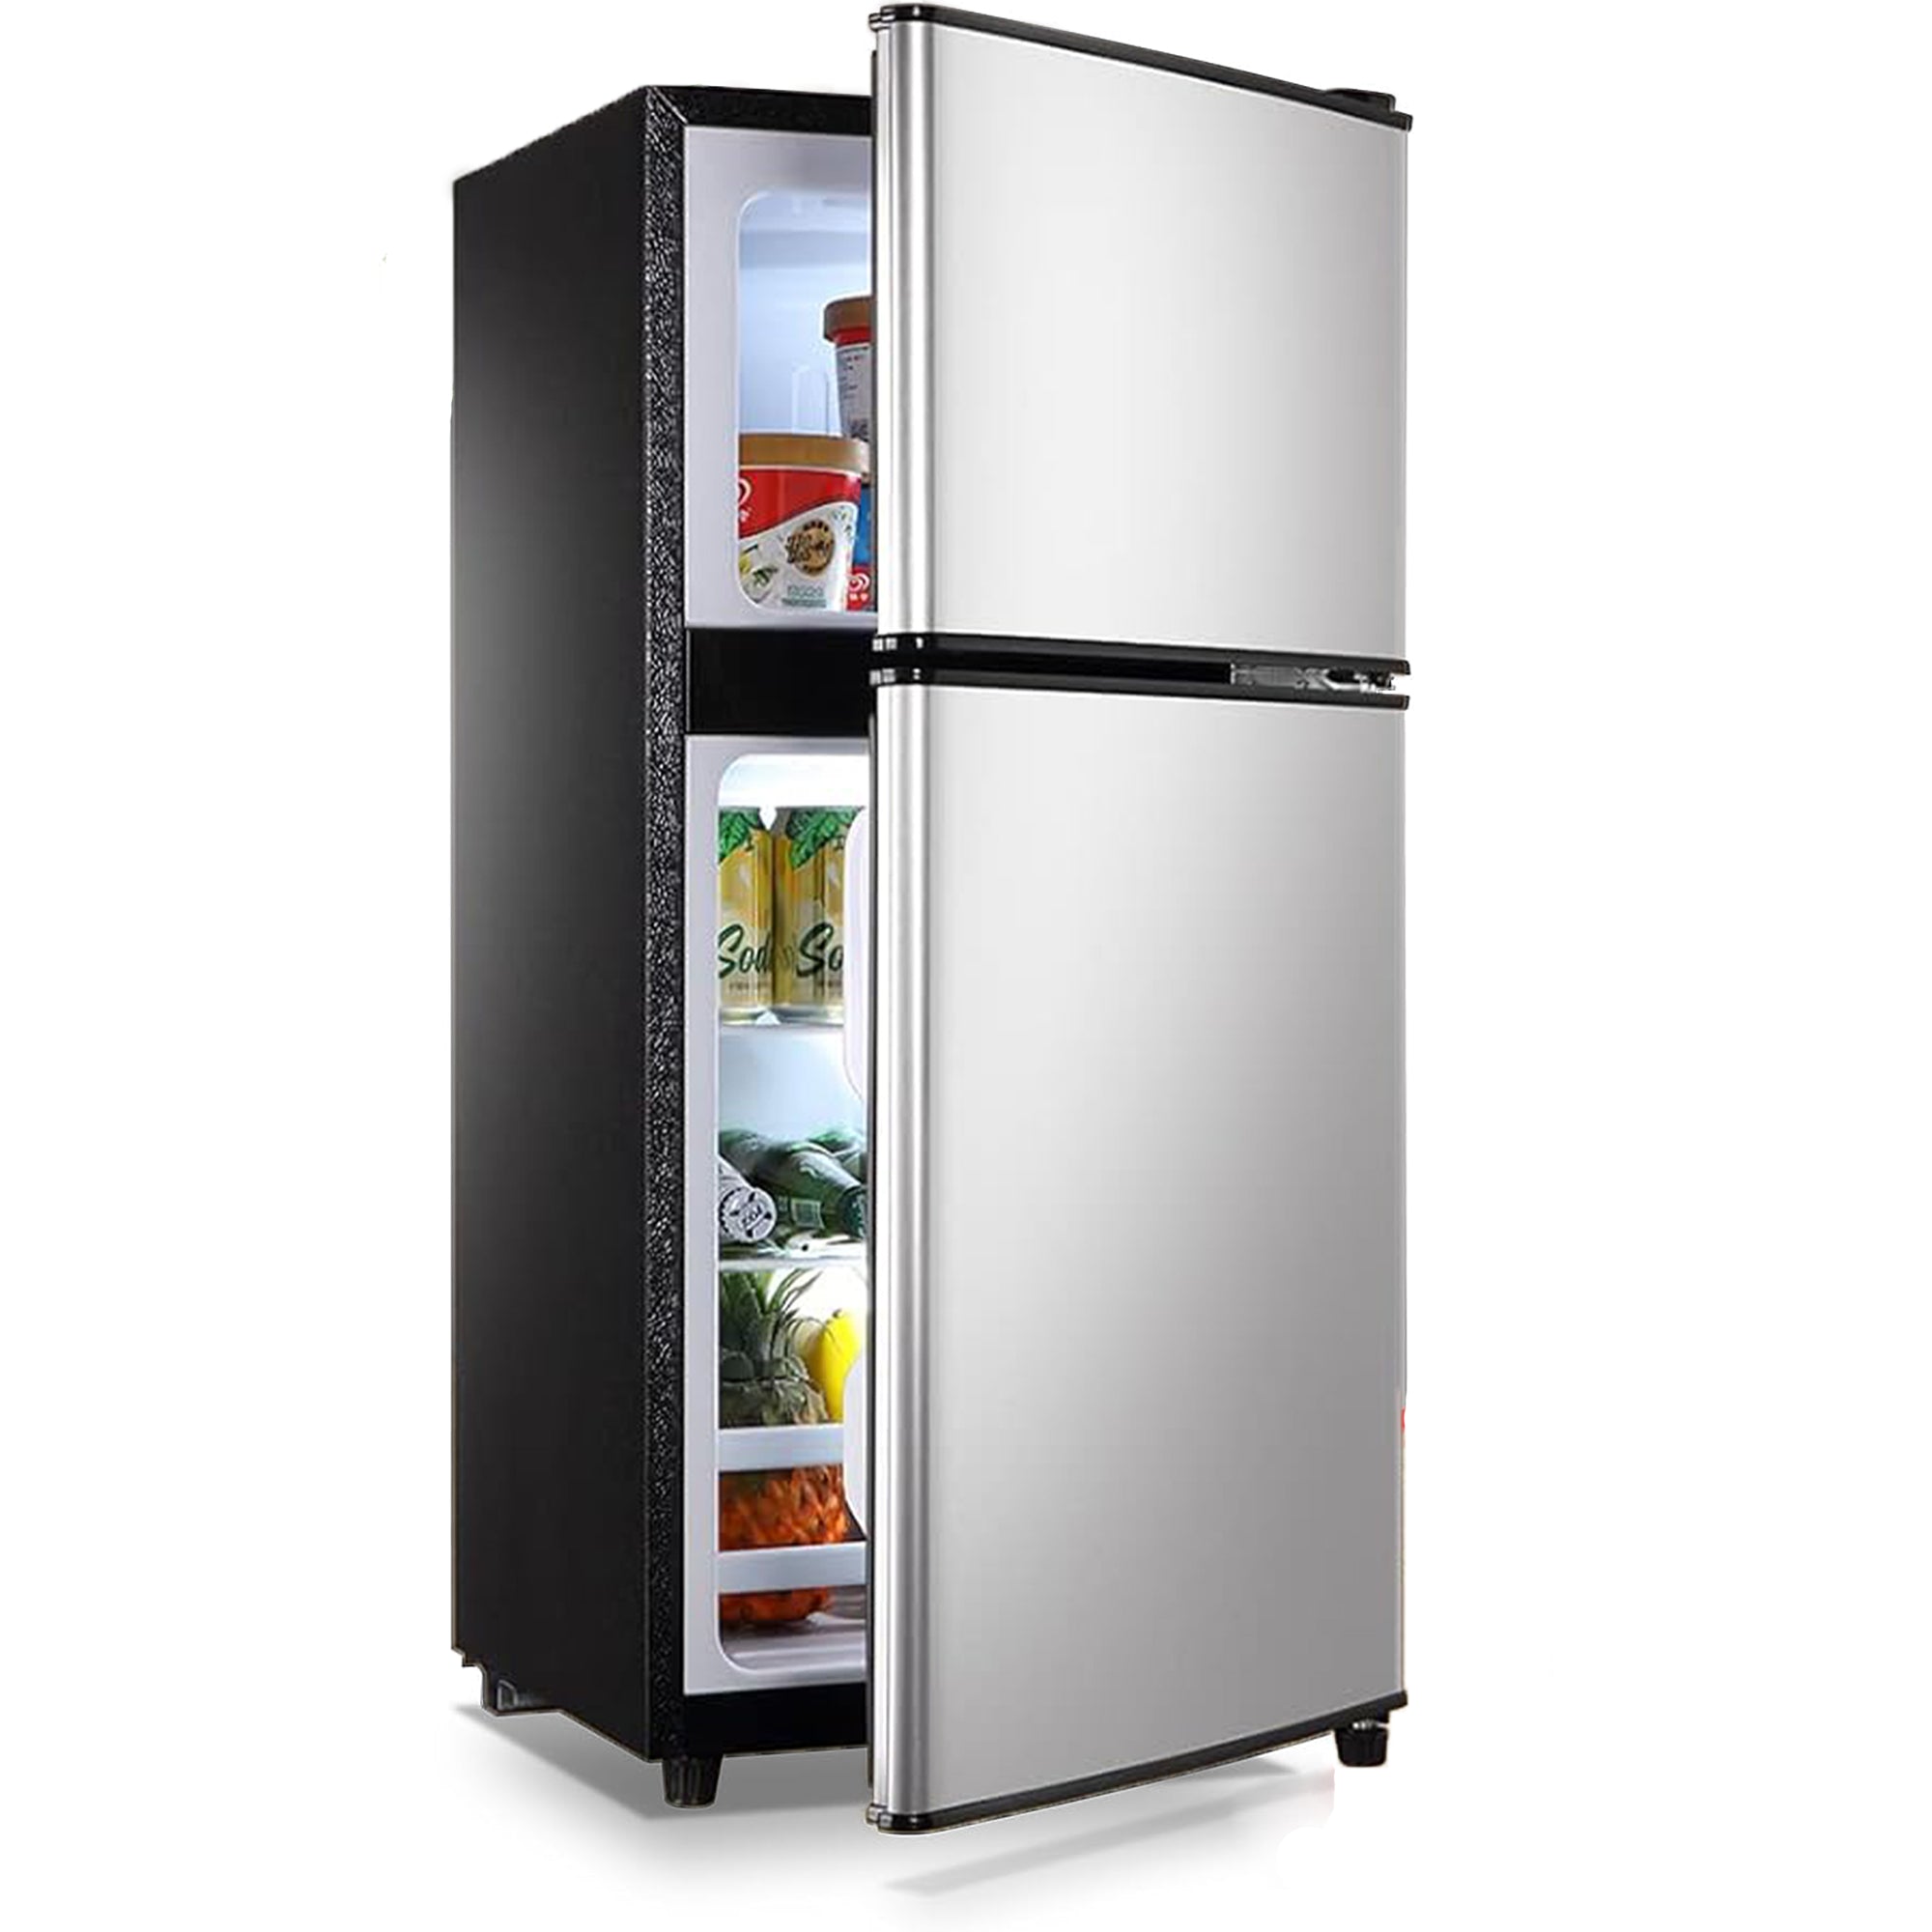 Load image into Gallery viewer, Mini Fridge with Freezer 3.6 Cu.Ft Two-Door Compact Refrigerator for Dorm, Office, Bar, RV, Bedroom, Silver
